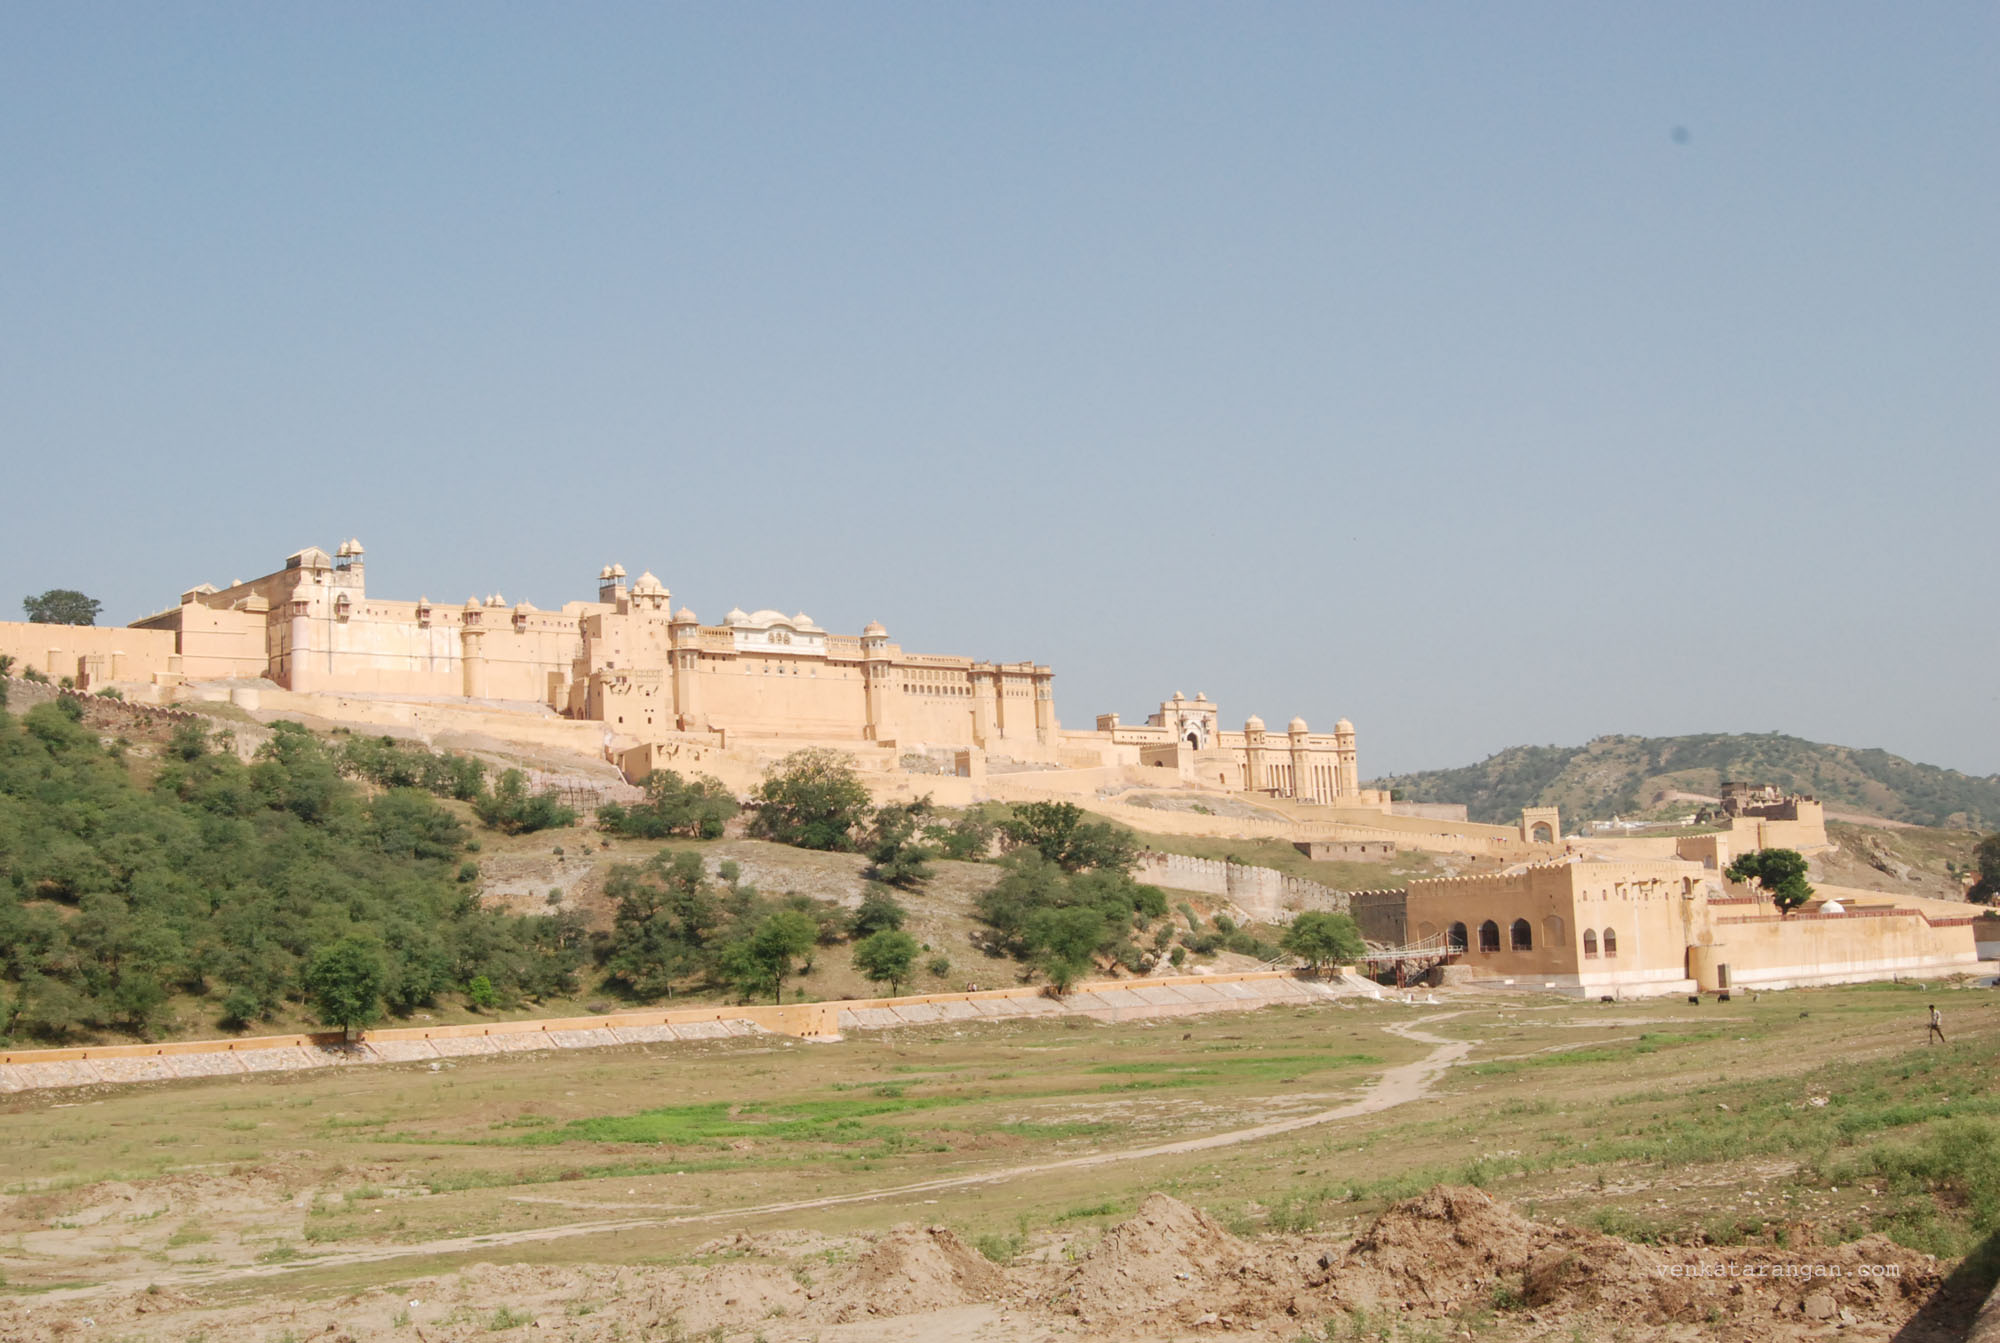 View of Amer (Amber) Fort